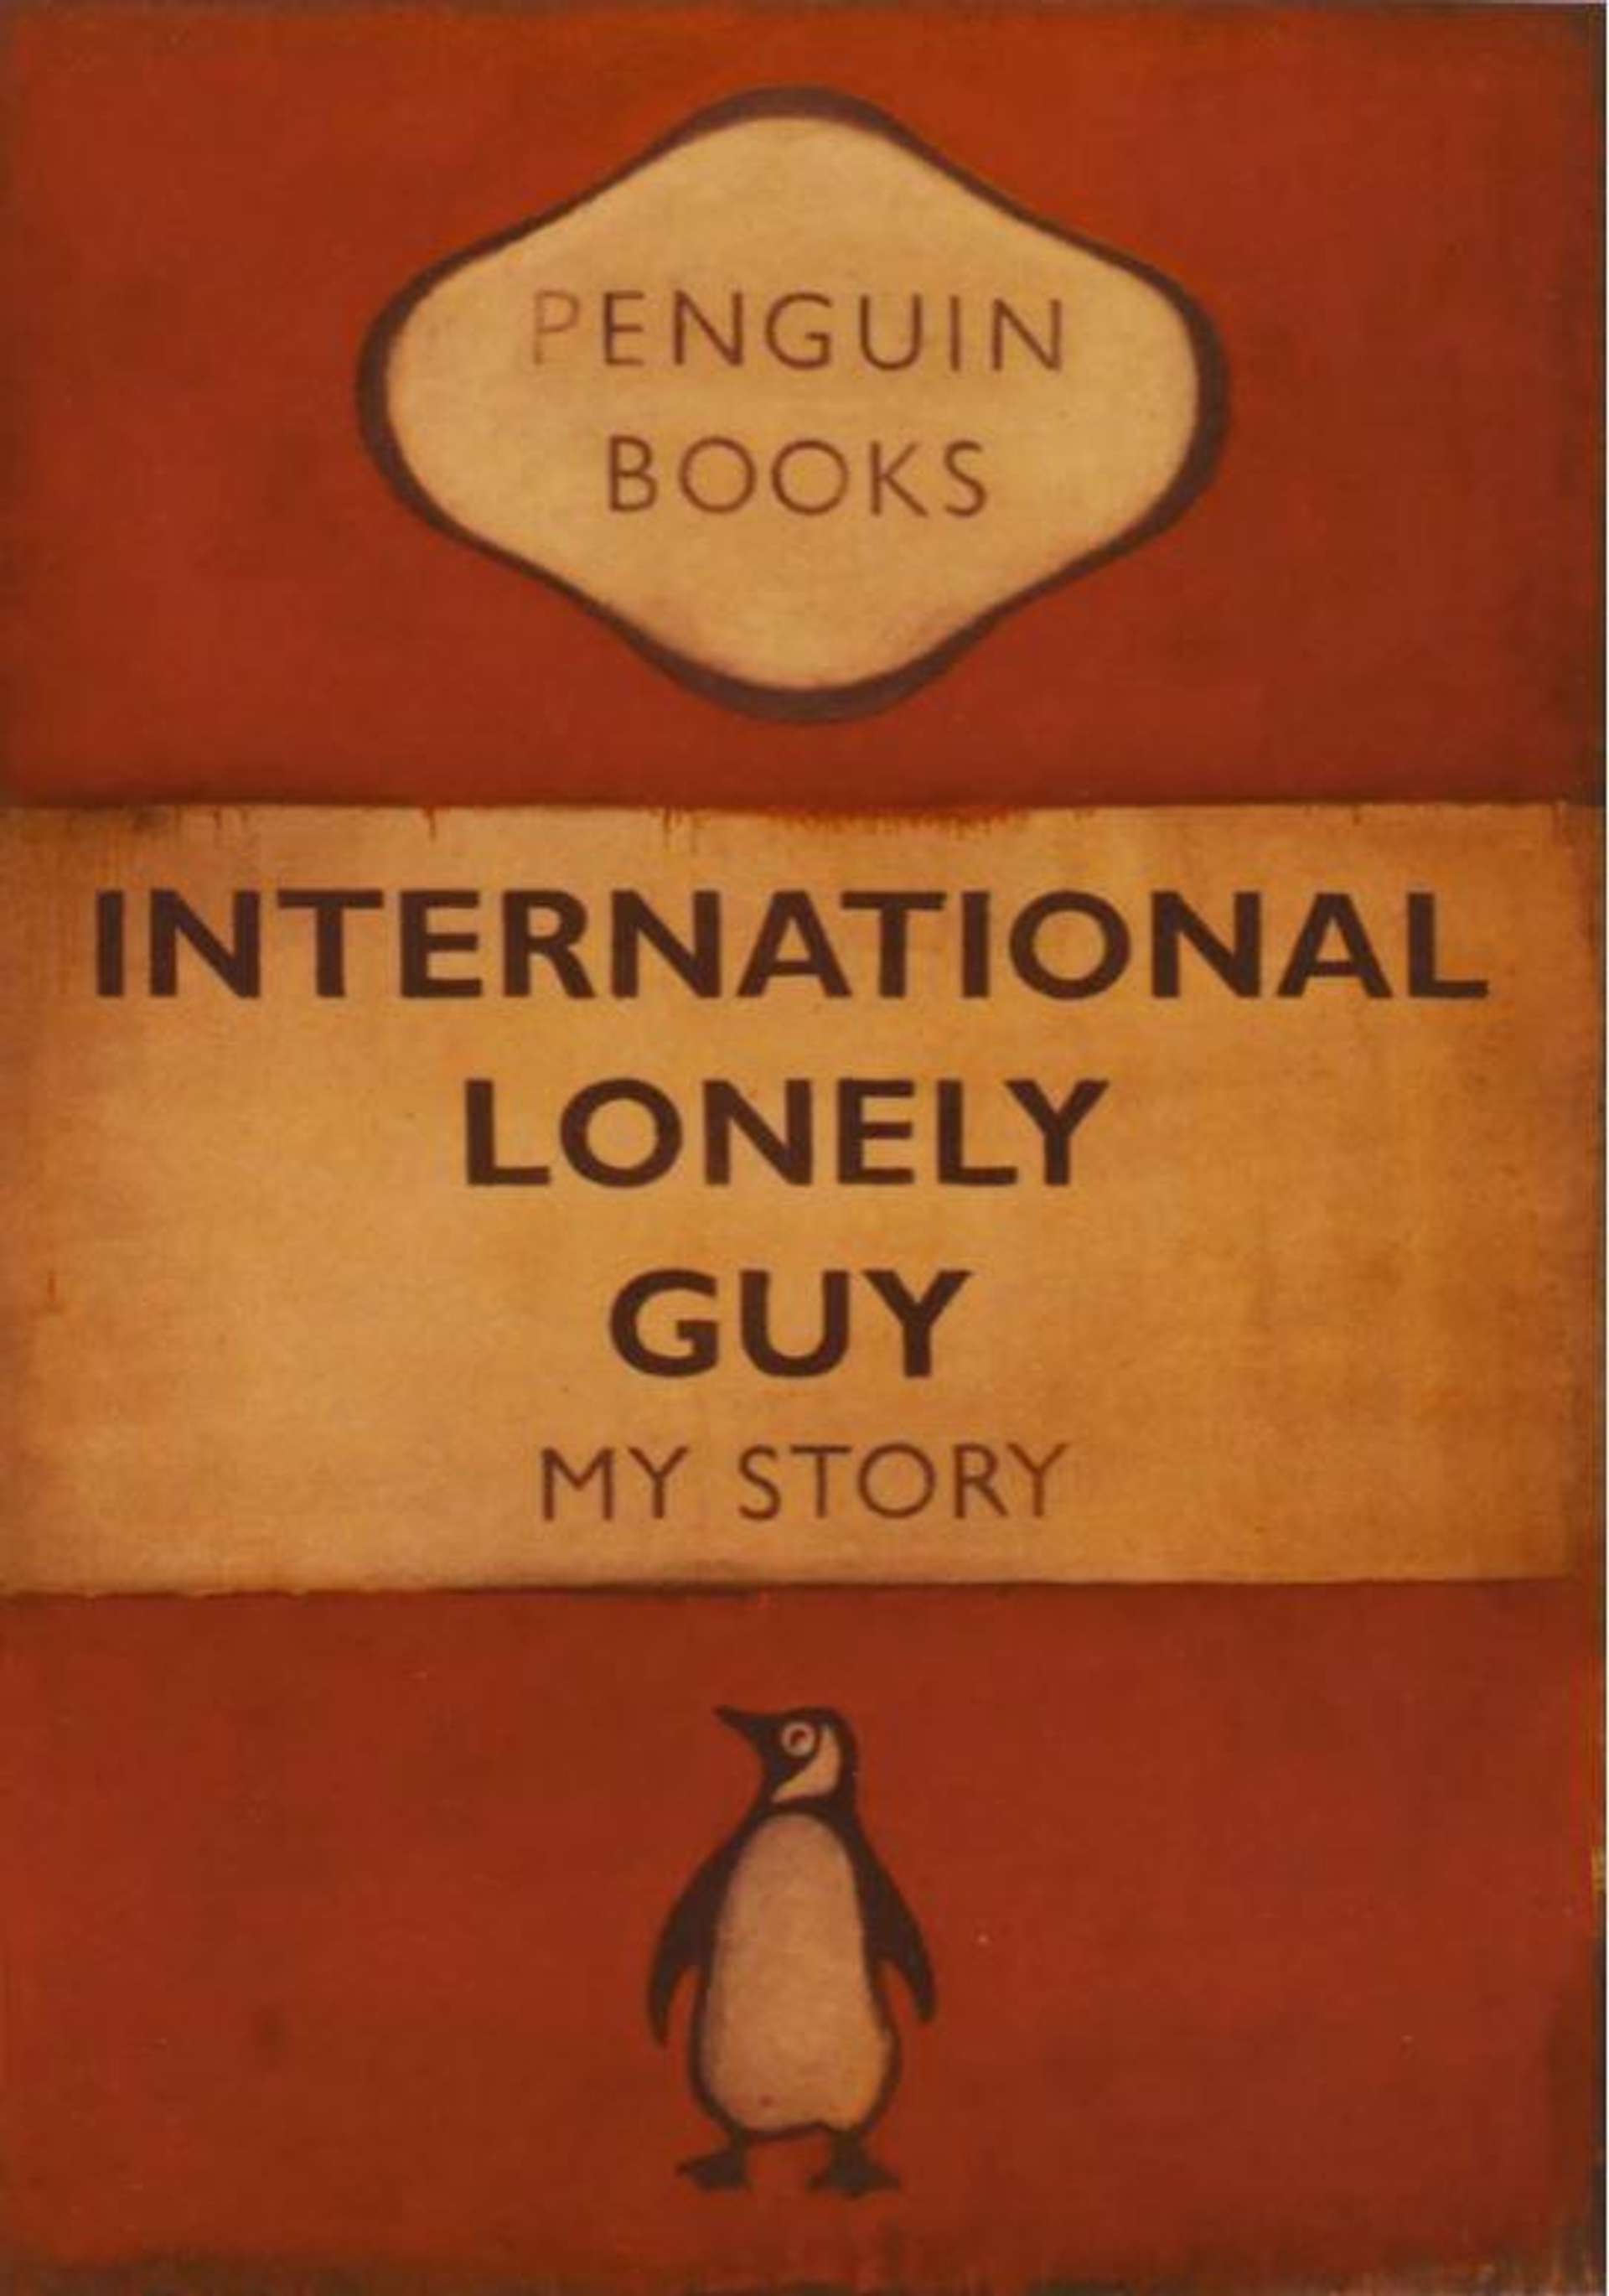 Harland Miller’s International Lonely Guy. A book cover with the title “international lonely guy” with a penguin at the bottom centre against a red background.